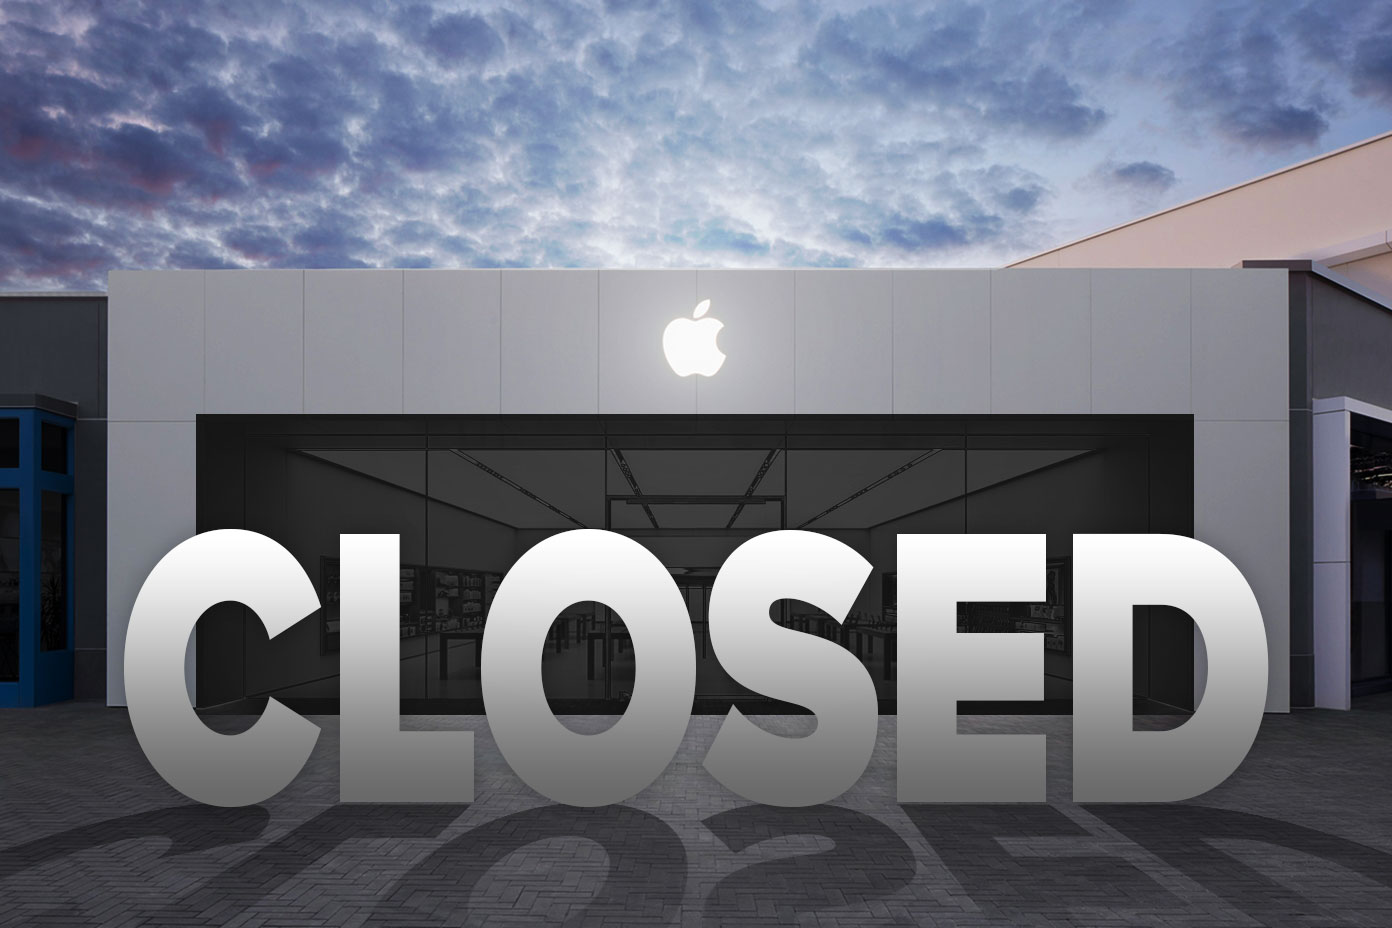 Apple is temporarily closing stores due to COVID-19